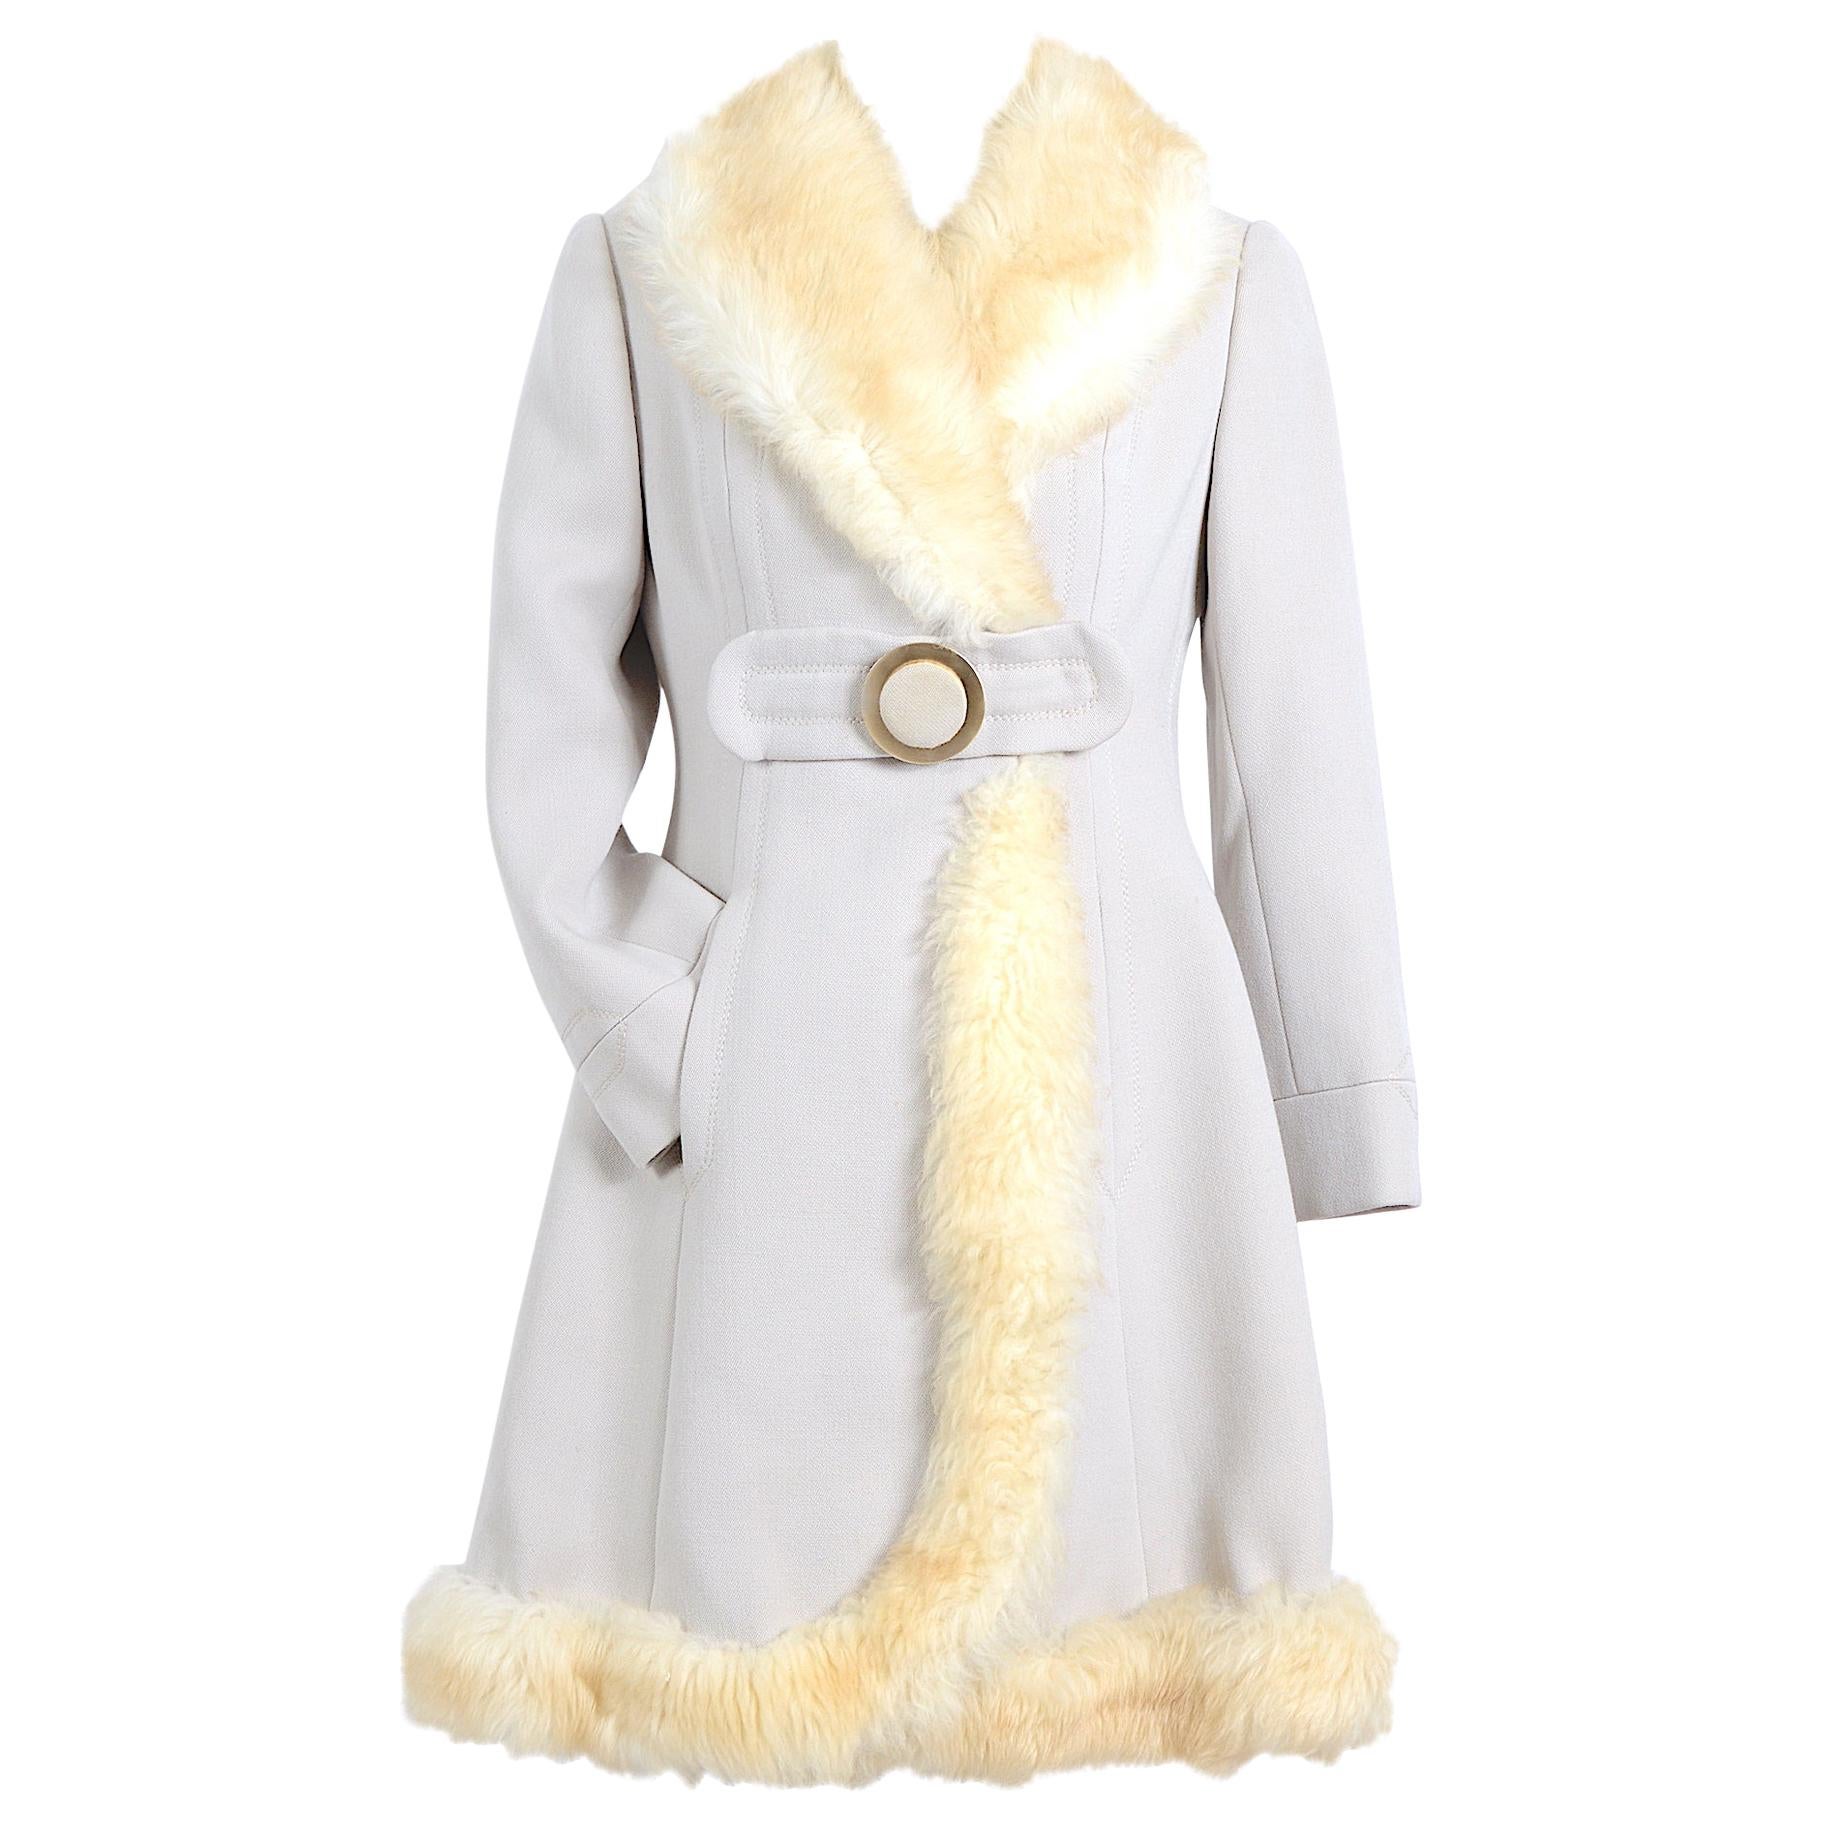 1960s Pierre Balmain Boutique trimmed with shearling vintage wool coat